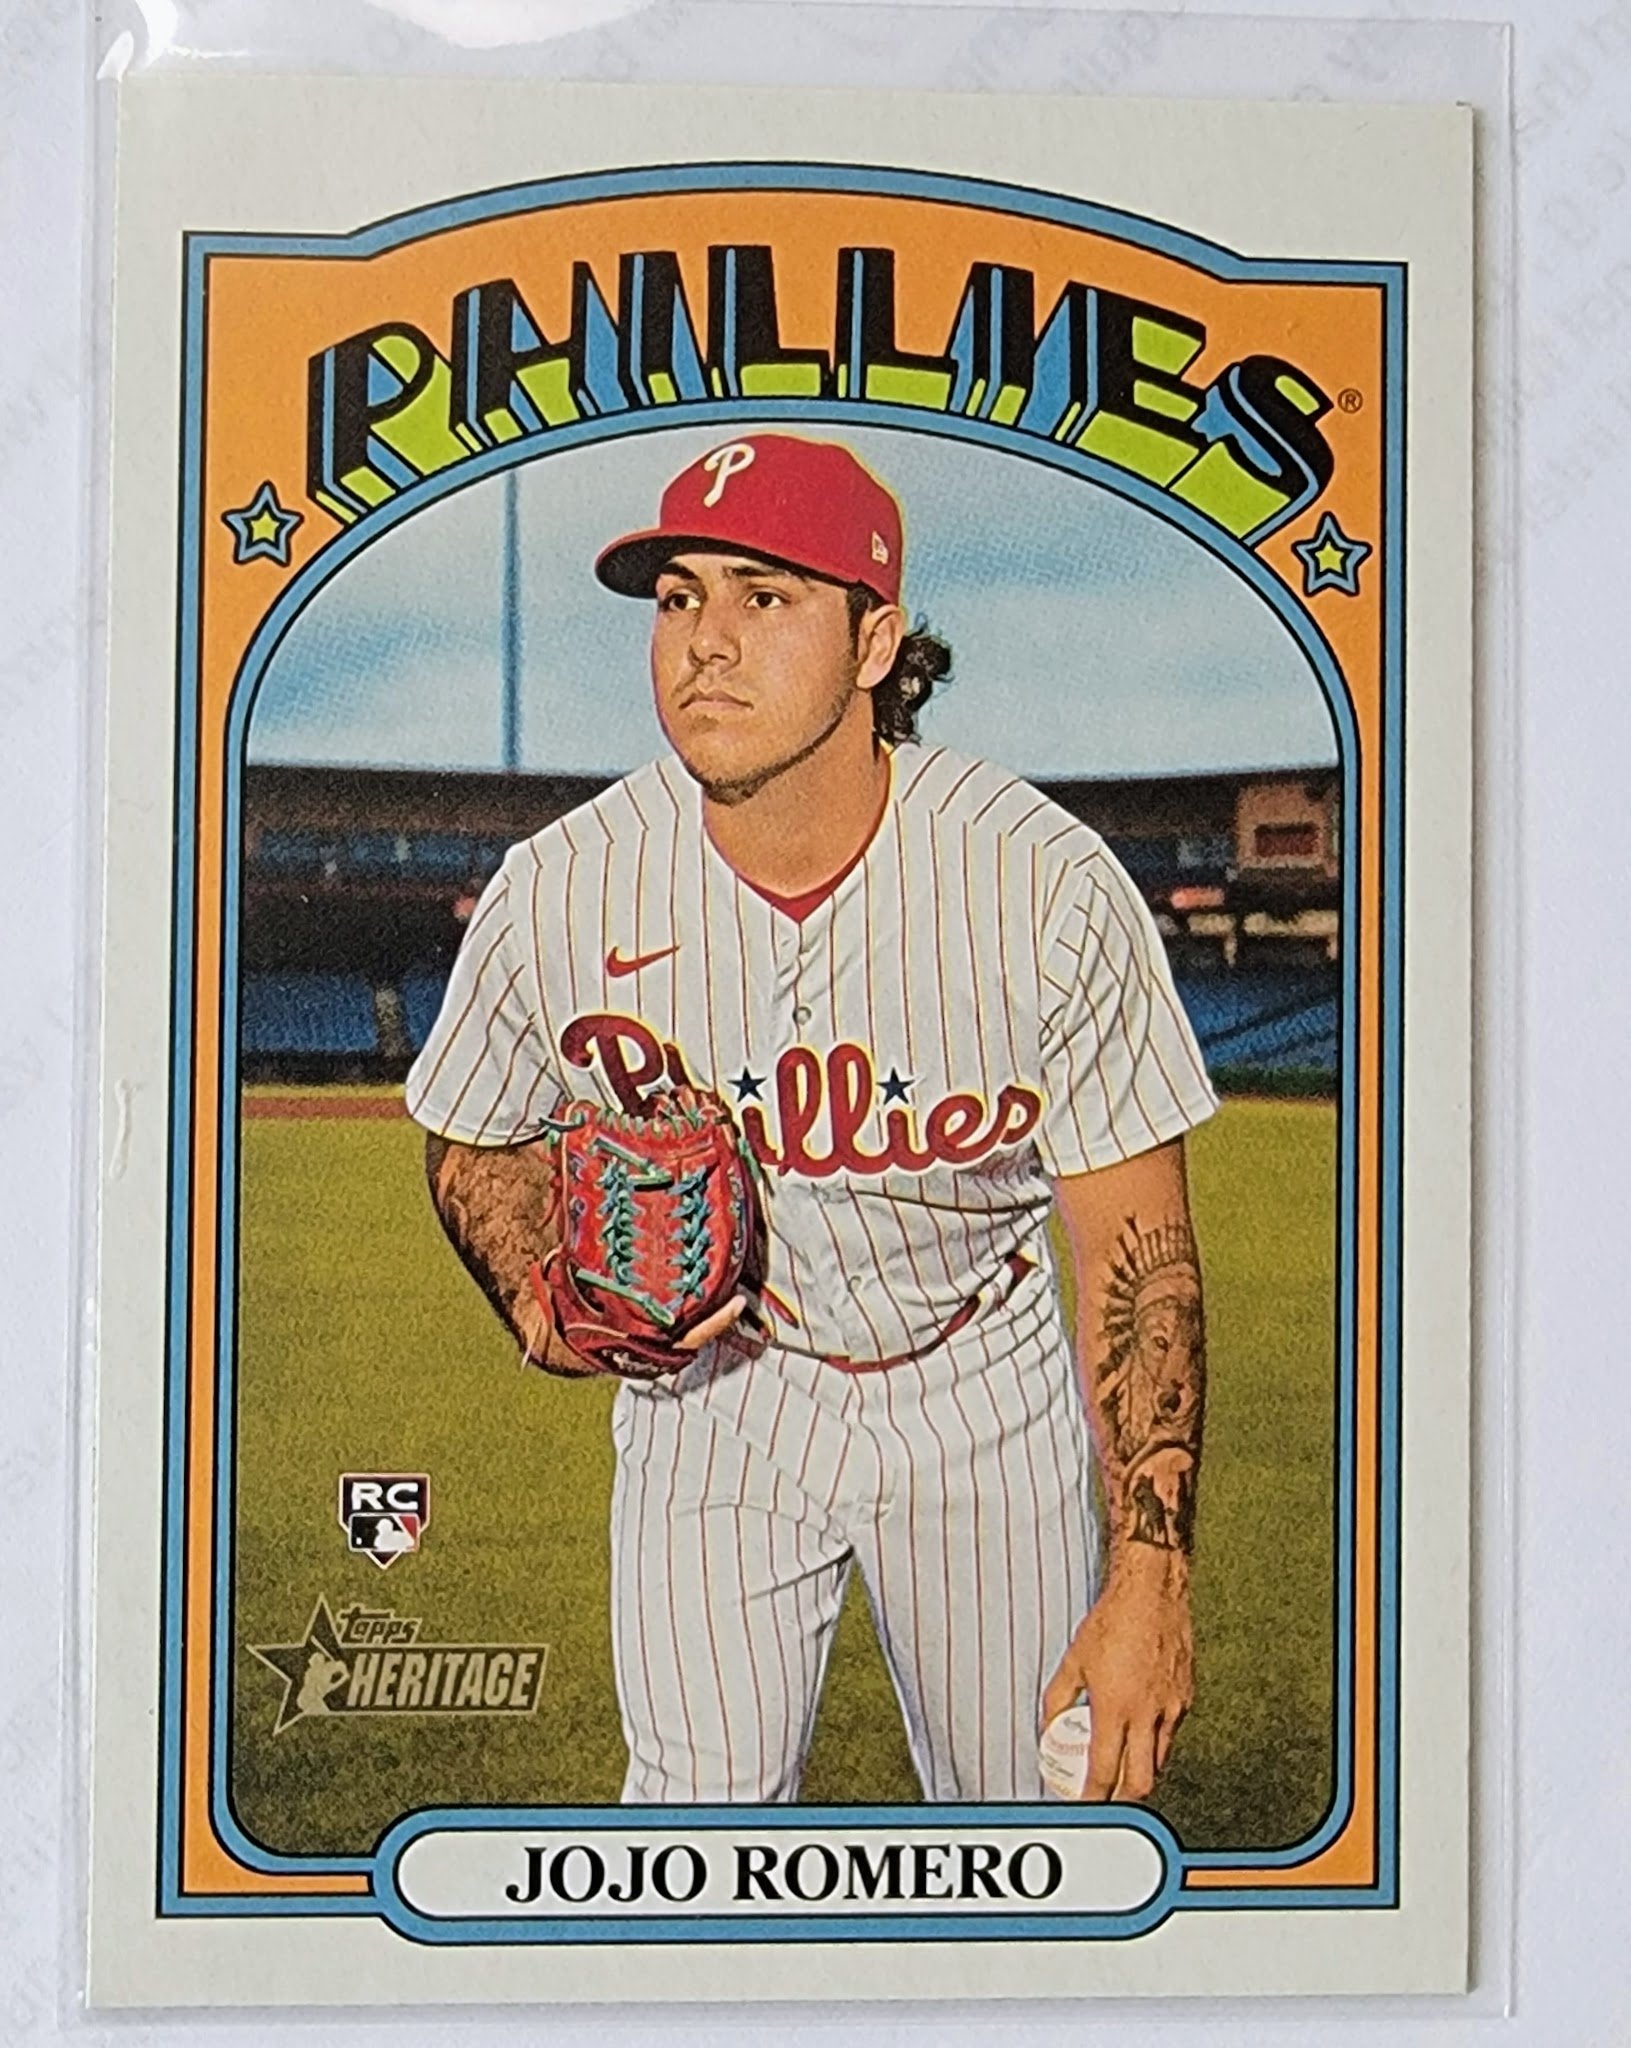 2021 Topps Heritage Jojo Romero Rookie Baseball Trading Card MCSC1 simple Xclusive Collectibles   